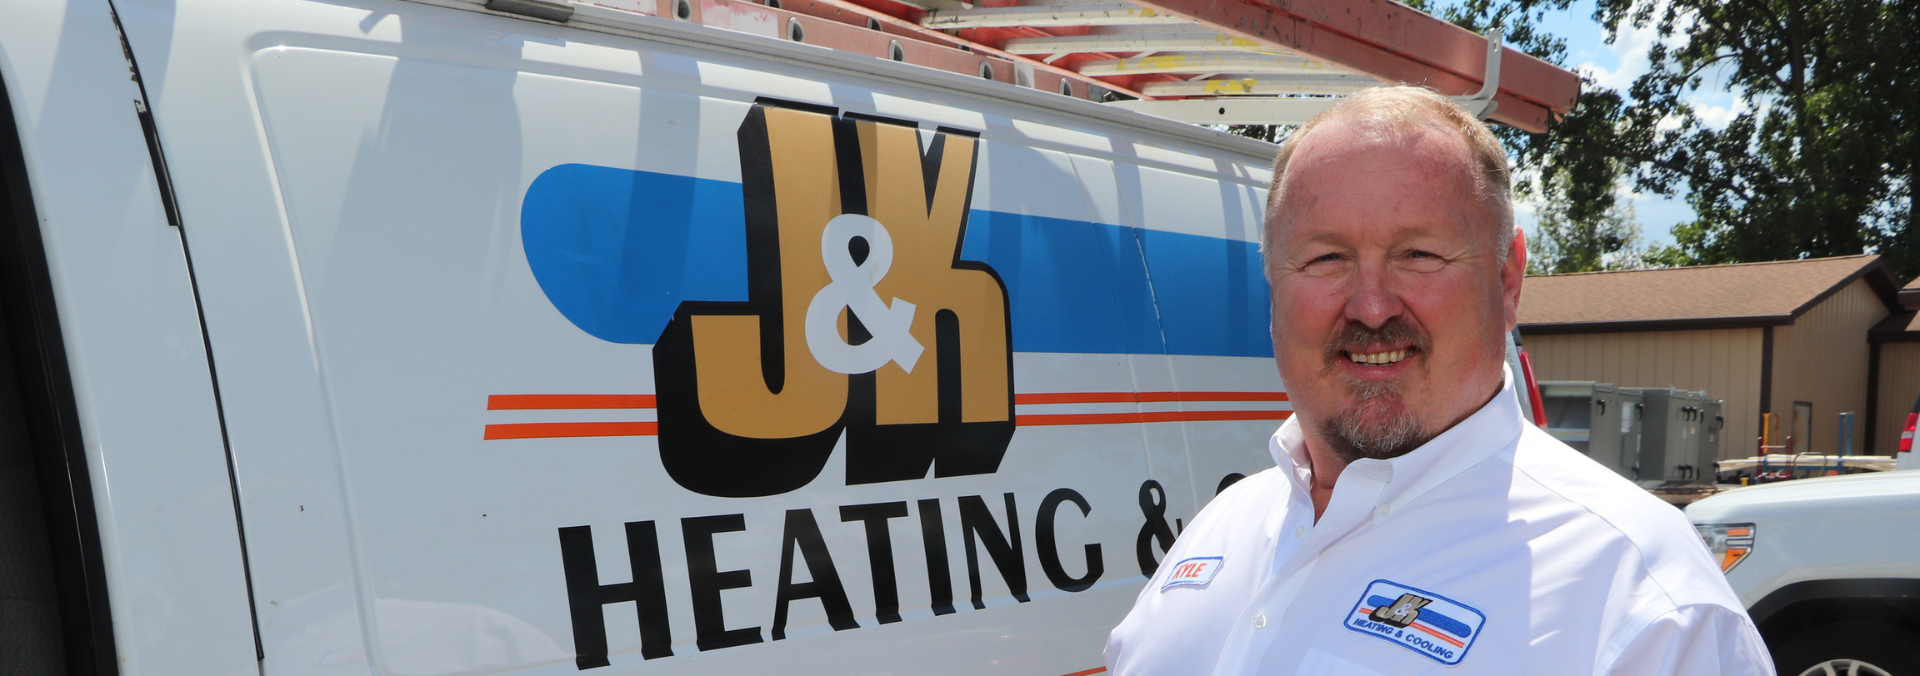 J&K Heating and Cooling in Monroe County Michigan